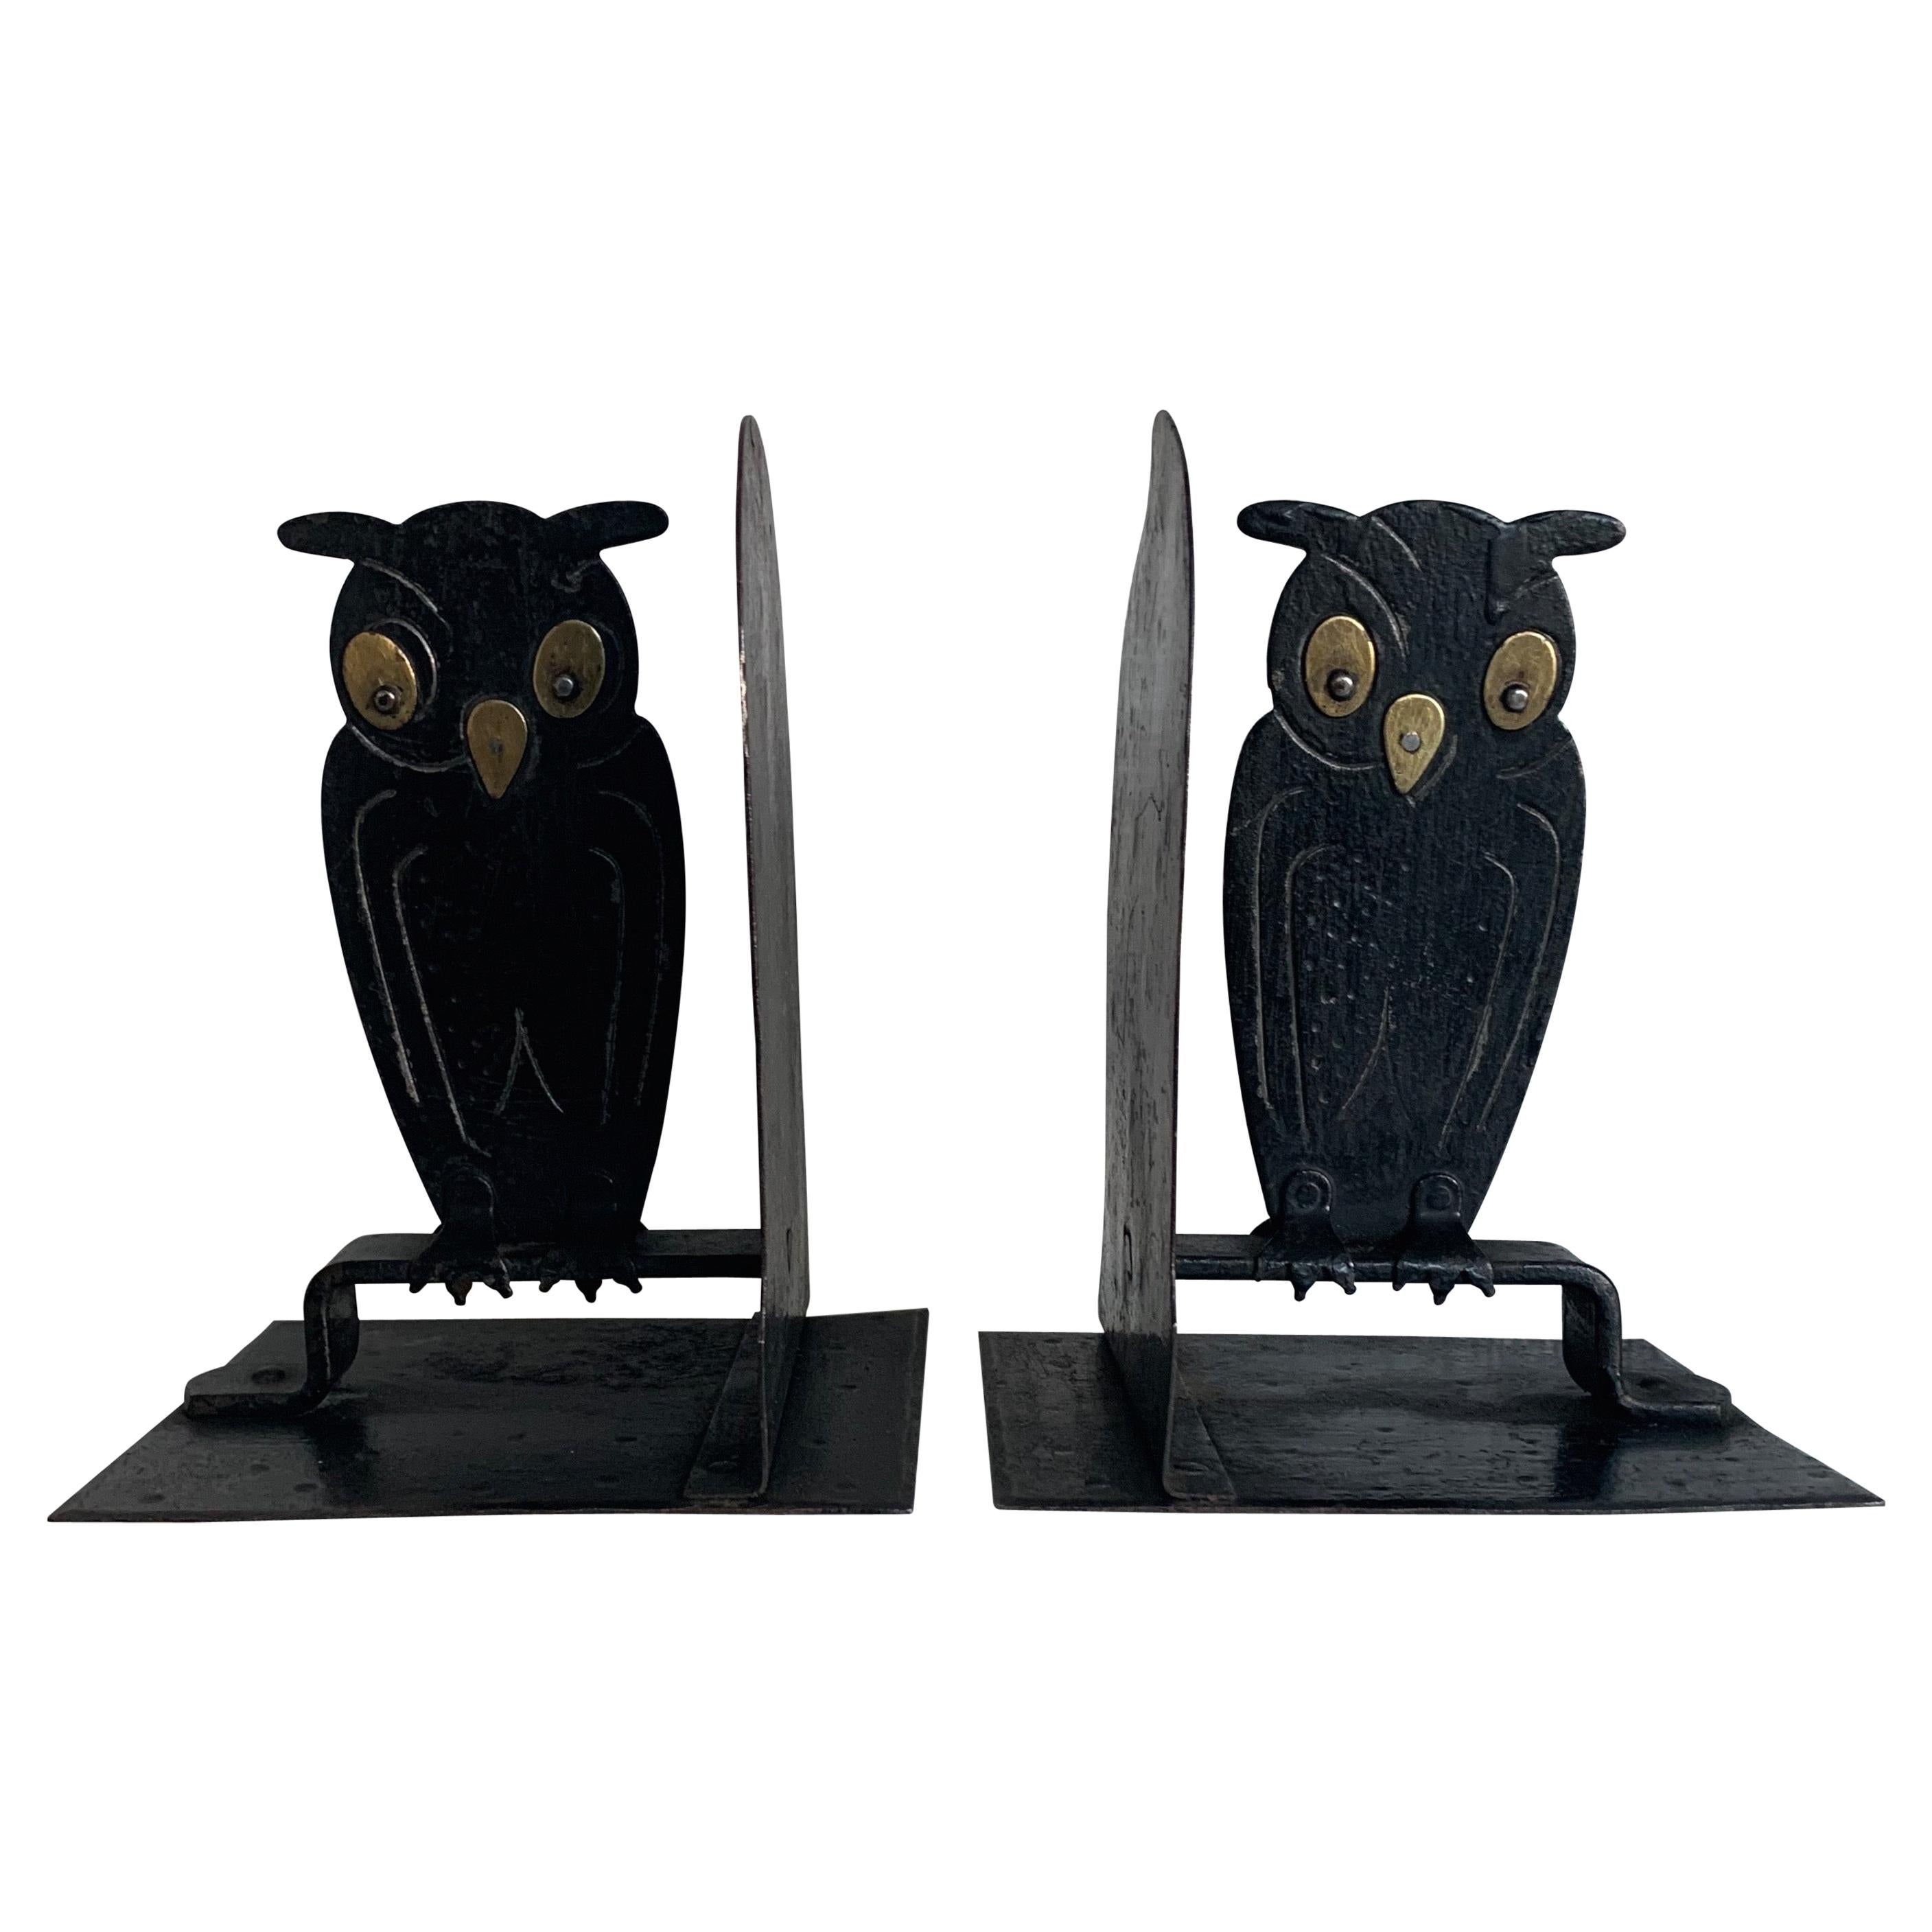 Pair of Hammered Arts & Crafts Blacked Metal Owl Bookends by Goberg, Hugo Berger